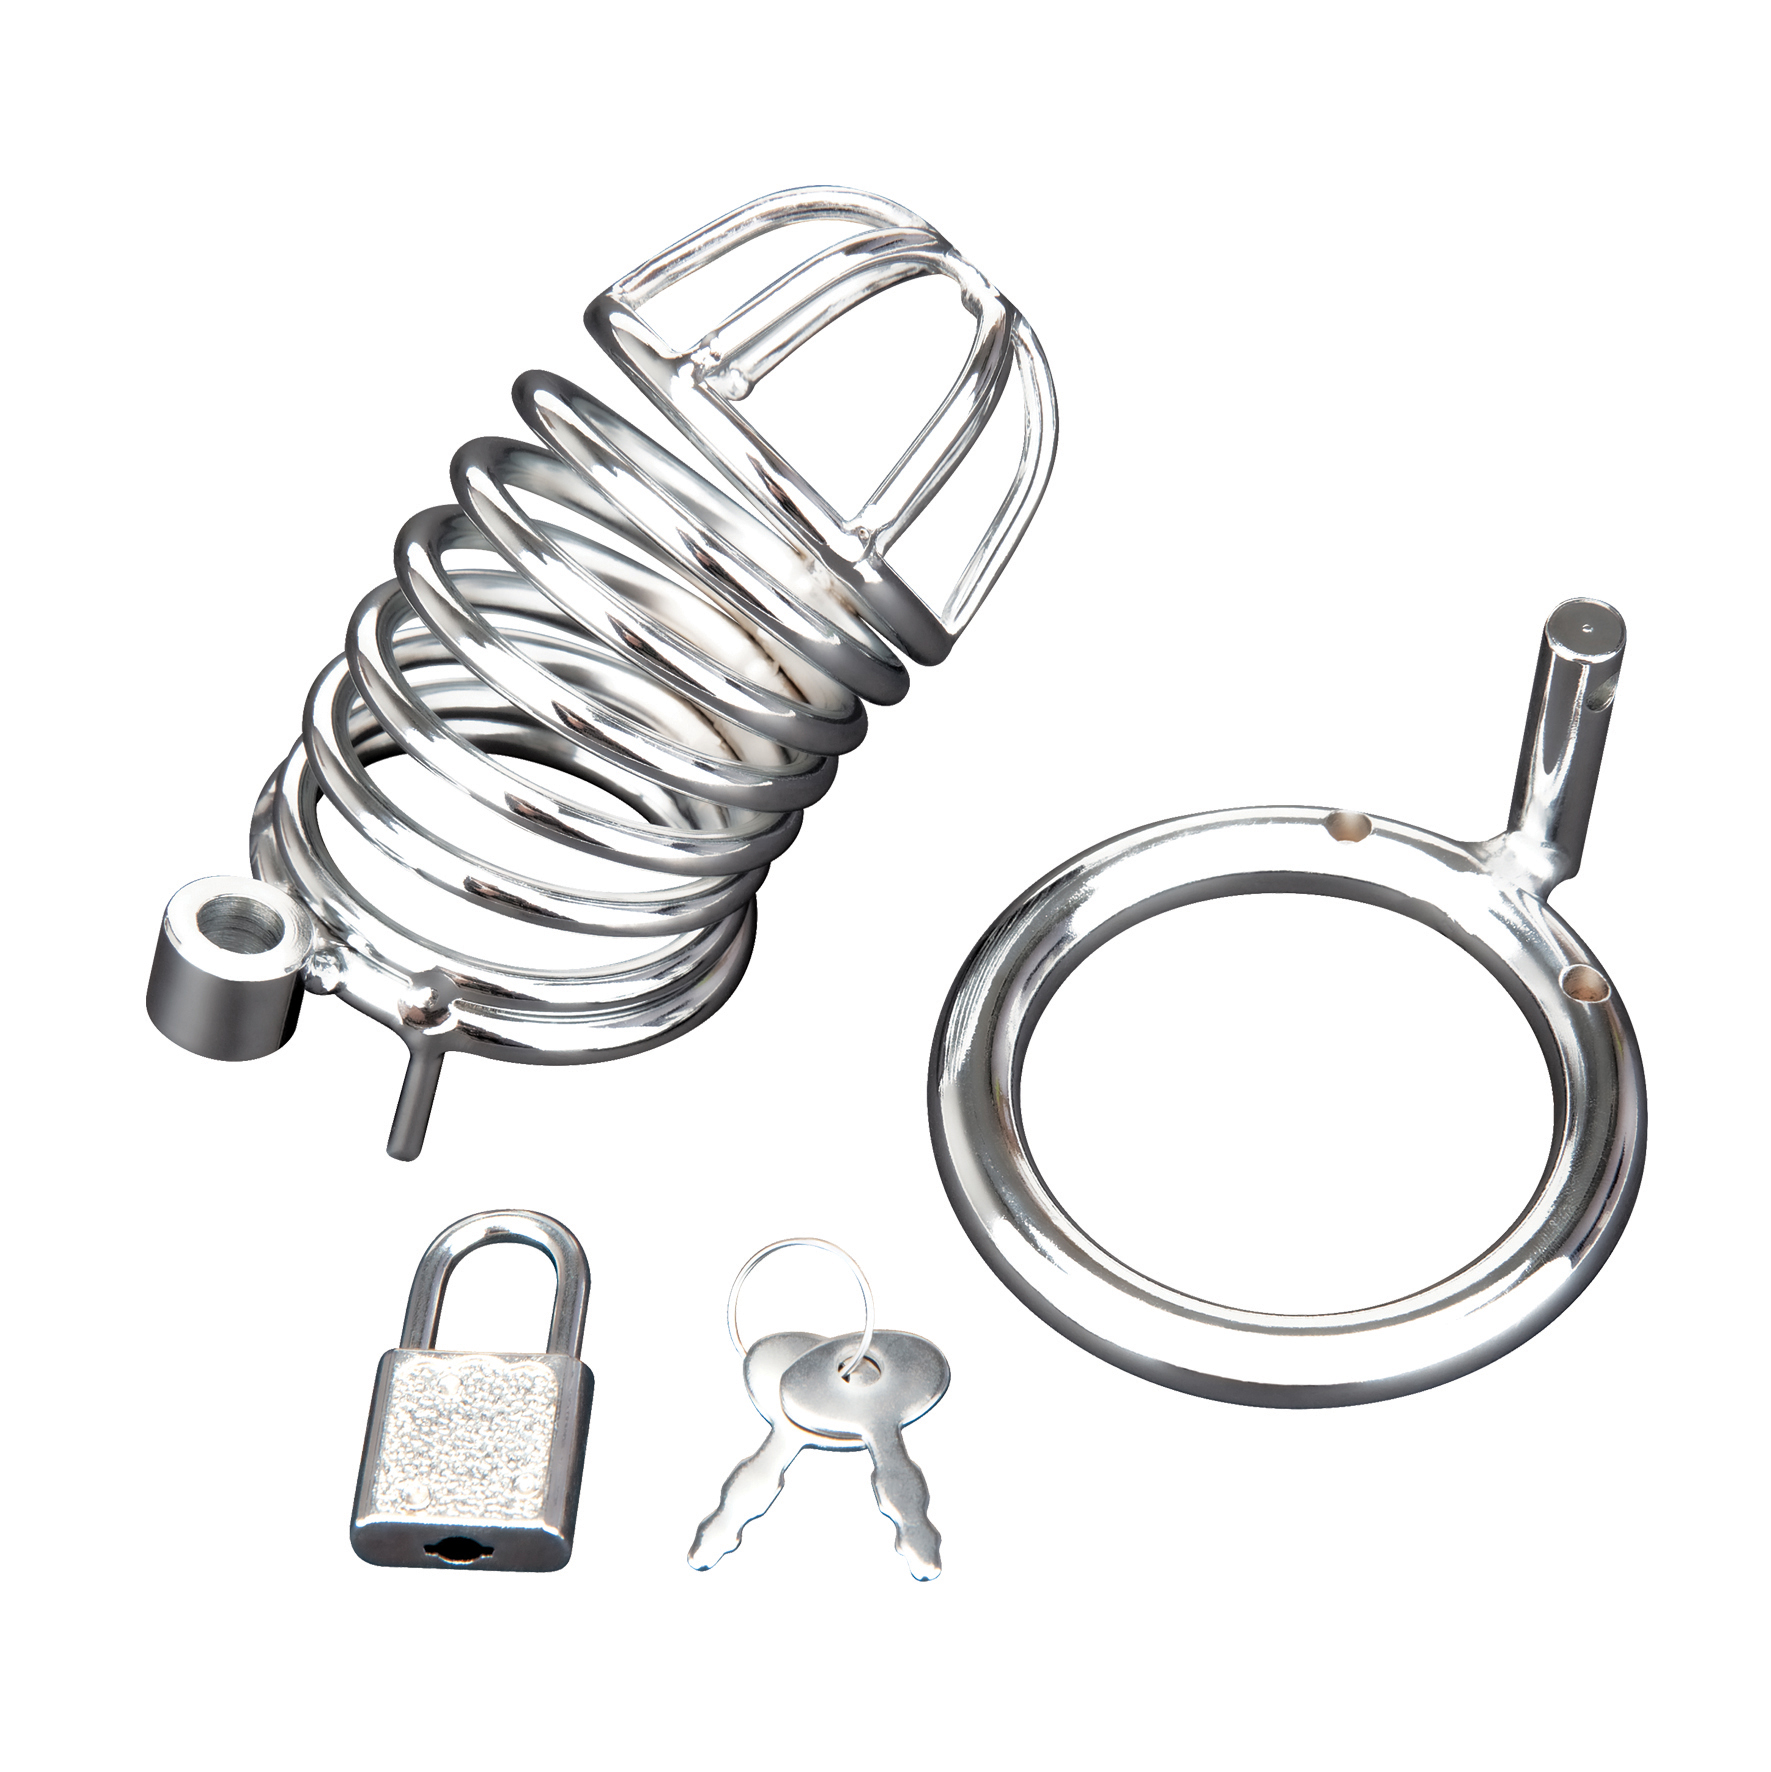 BLUE LINE C&B GEAR Deluxe Chastity Cage